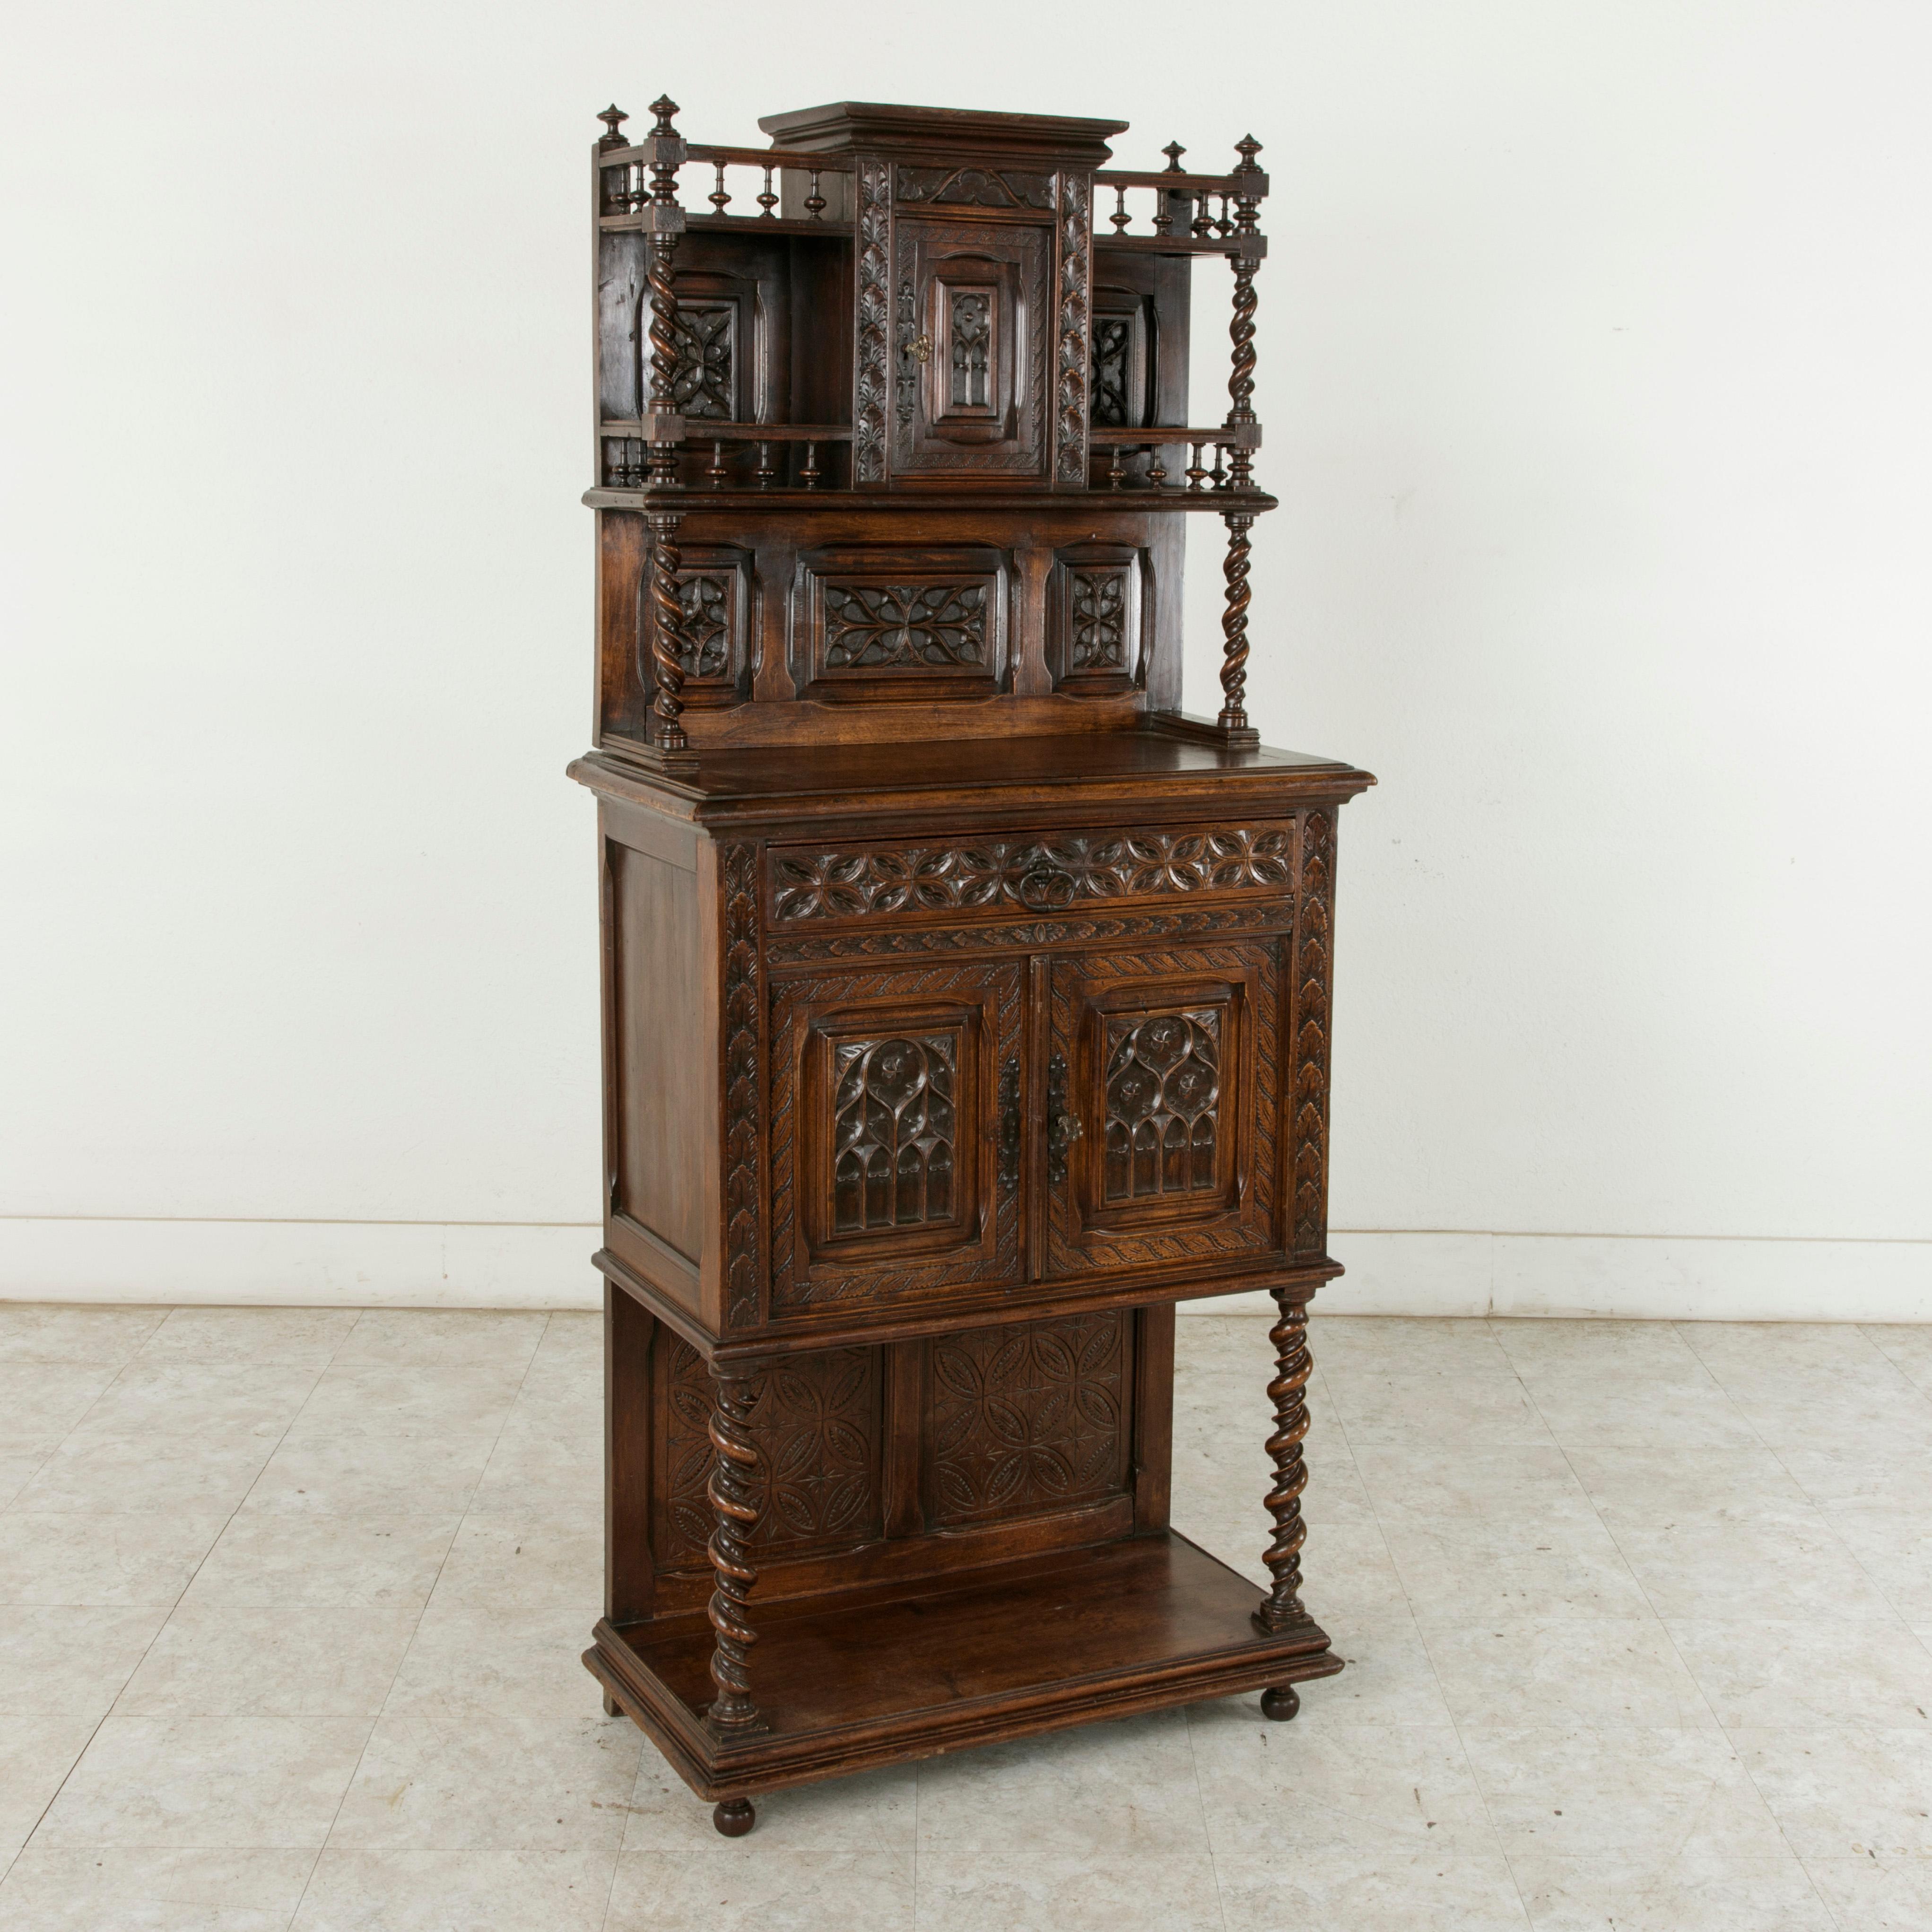 This late 19th century French Gothic style oak and walnut credenza features intricately hand carved Gothic motifs on all forward facing panels and double spiraled barley twist columns that support its many levels. At counter height is a single